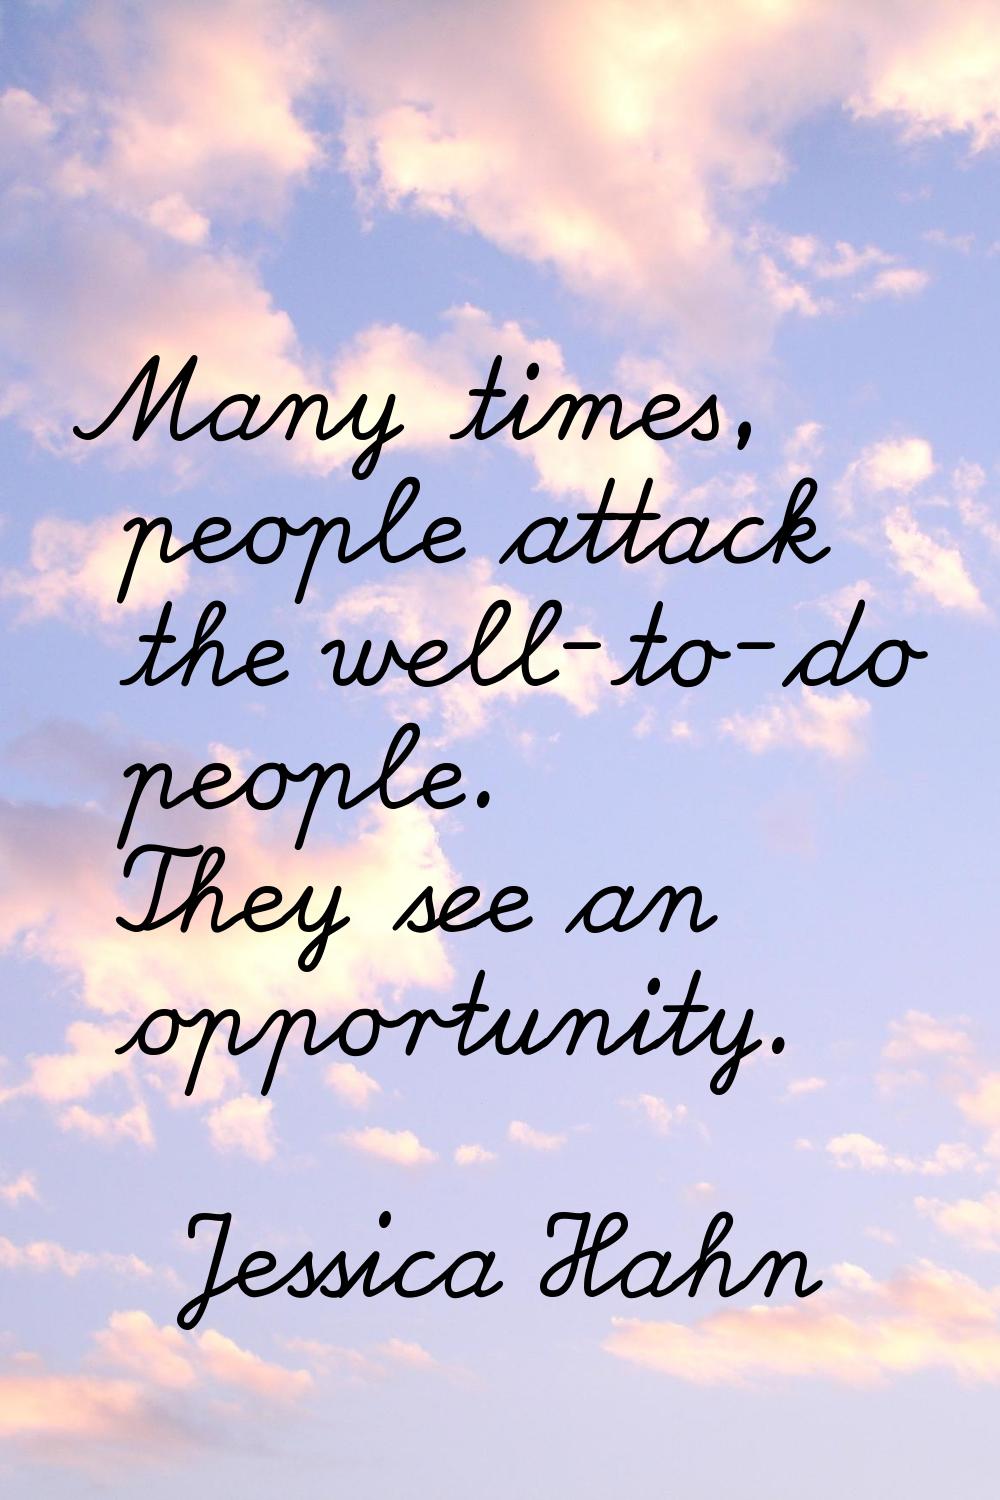 Many times, people attack the well-to-do people. They see an opportunity.